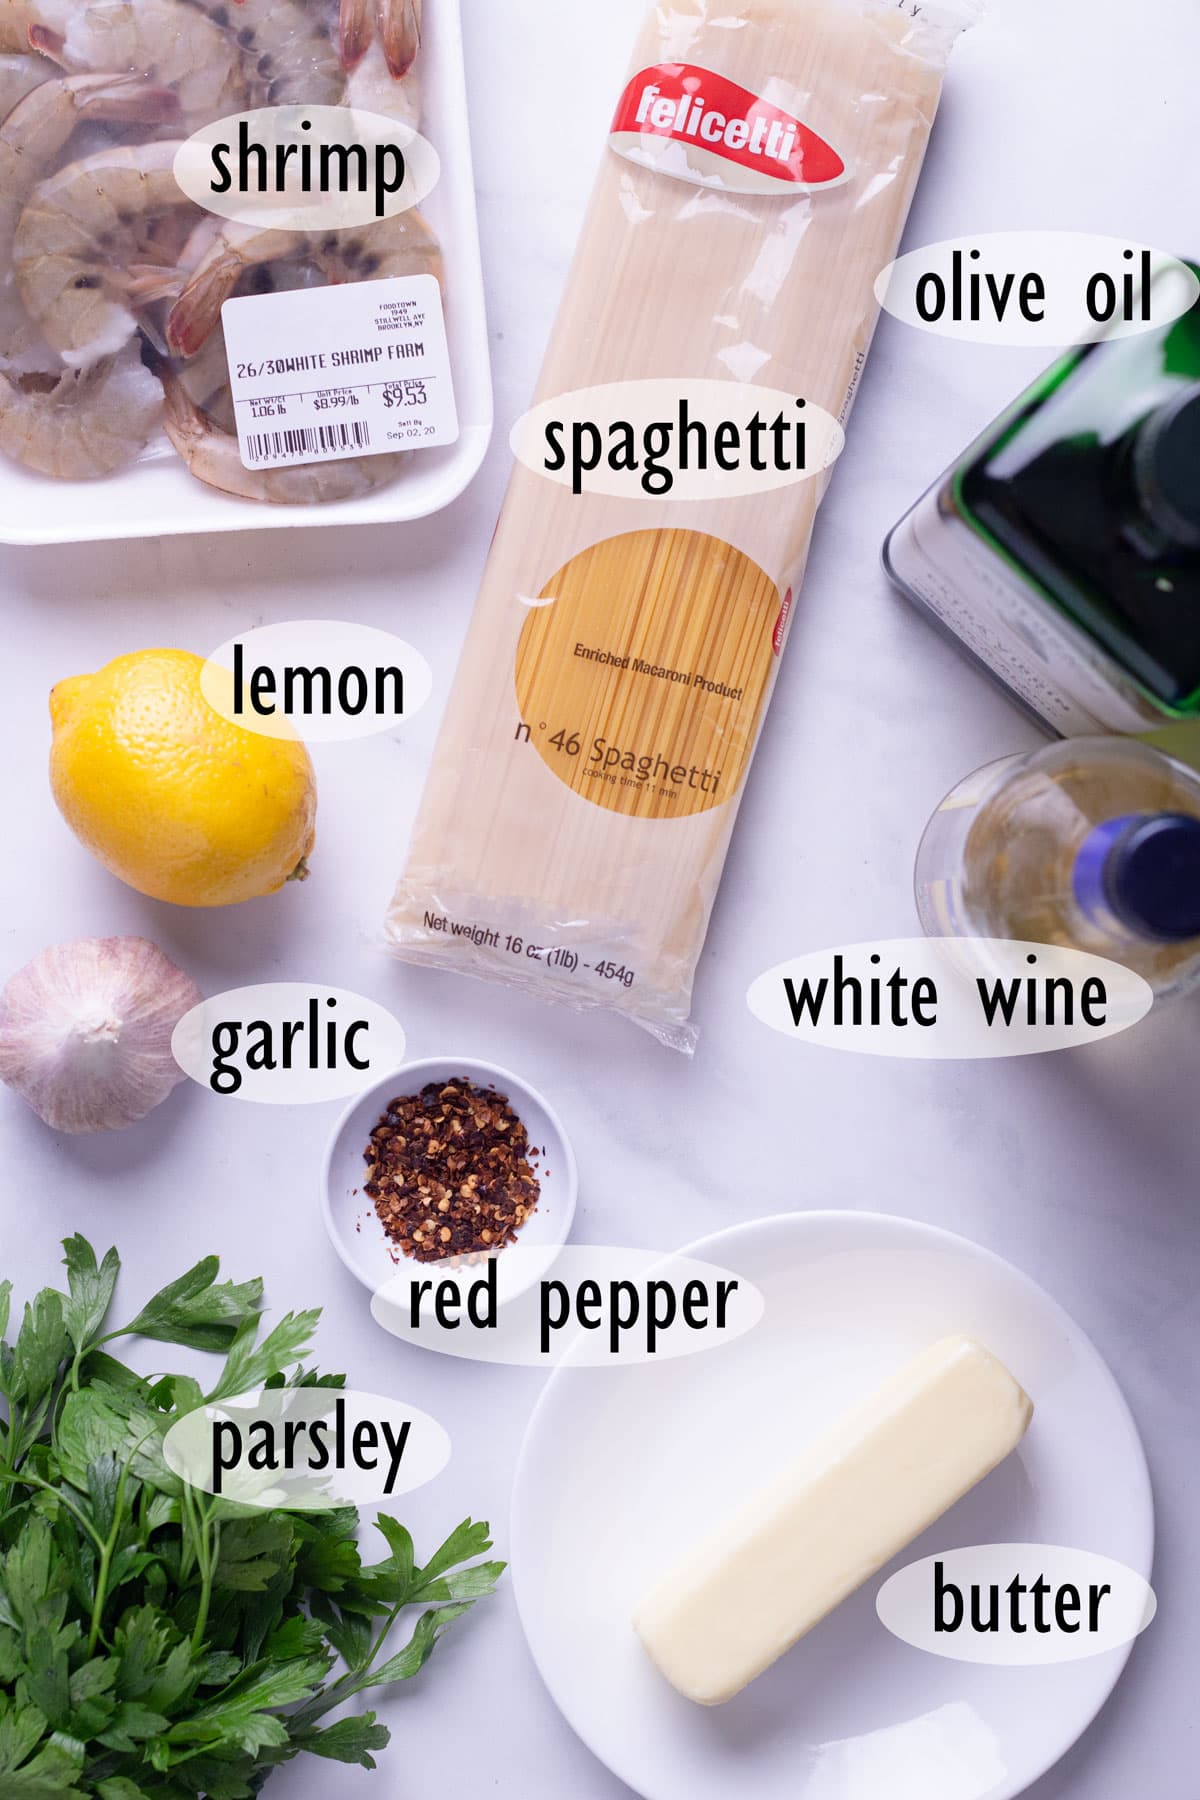 Individual ingredients needed for recipe, including shrimp, spaghetti, garlic, wine and butter.